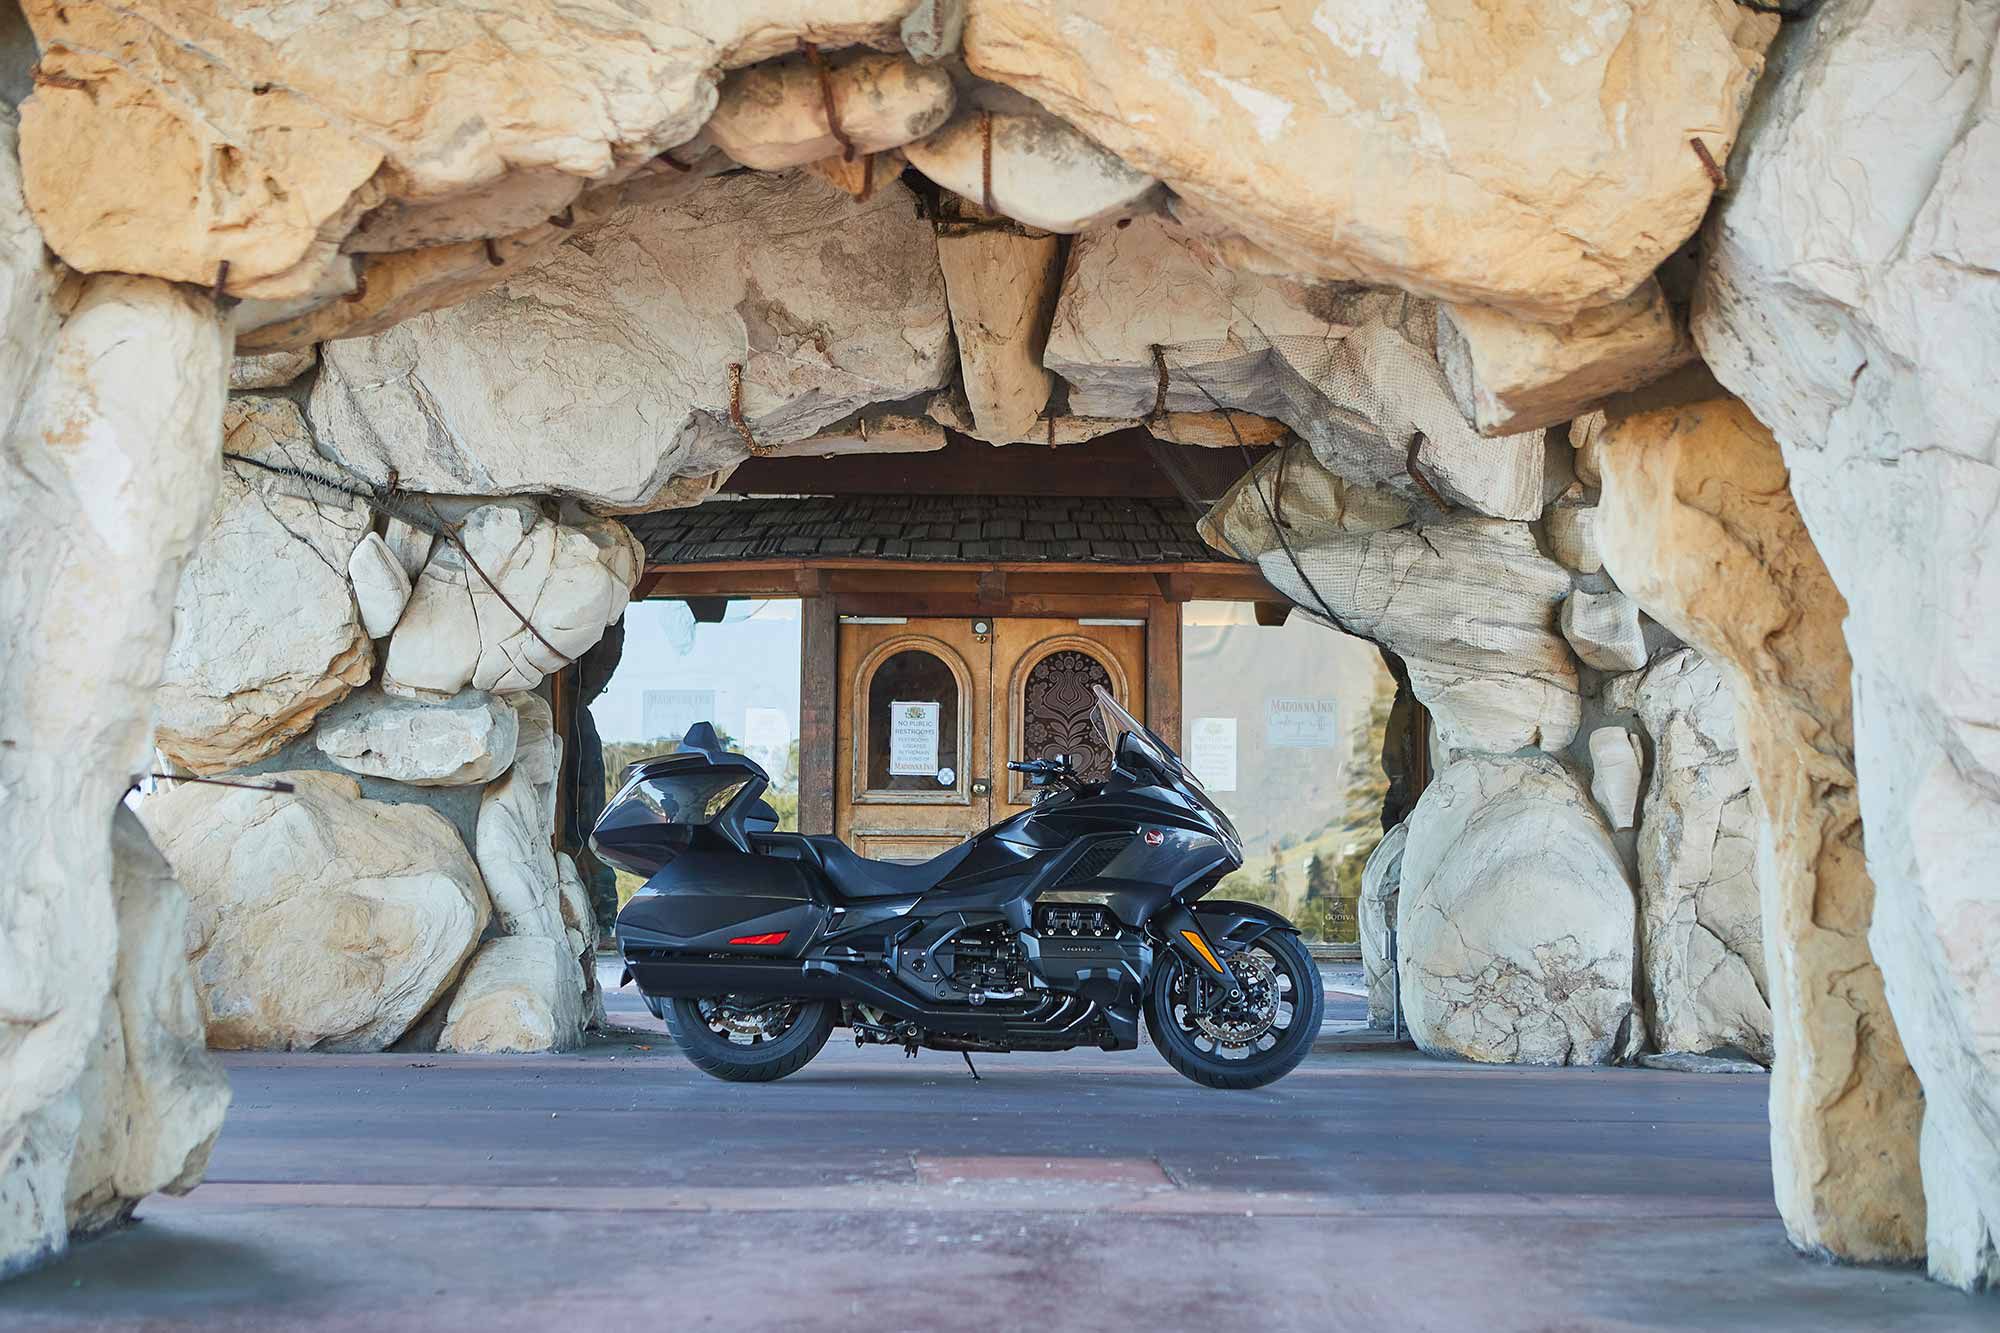 When it comes to road touring, no other motorcycle offers the type of capability of a Honda Gold Wing Tour.